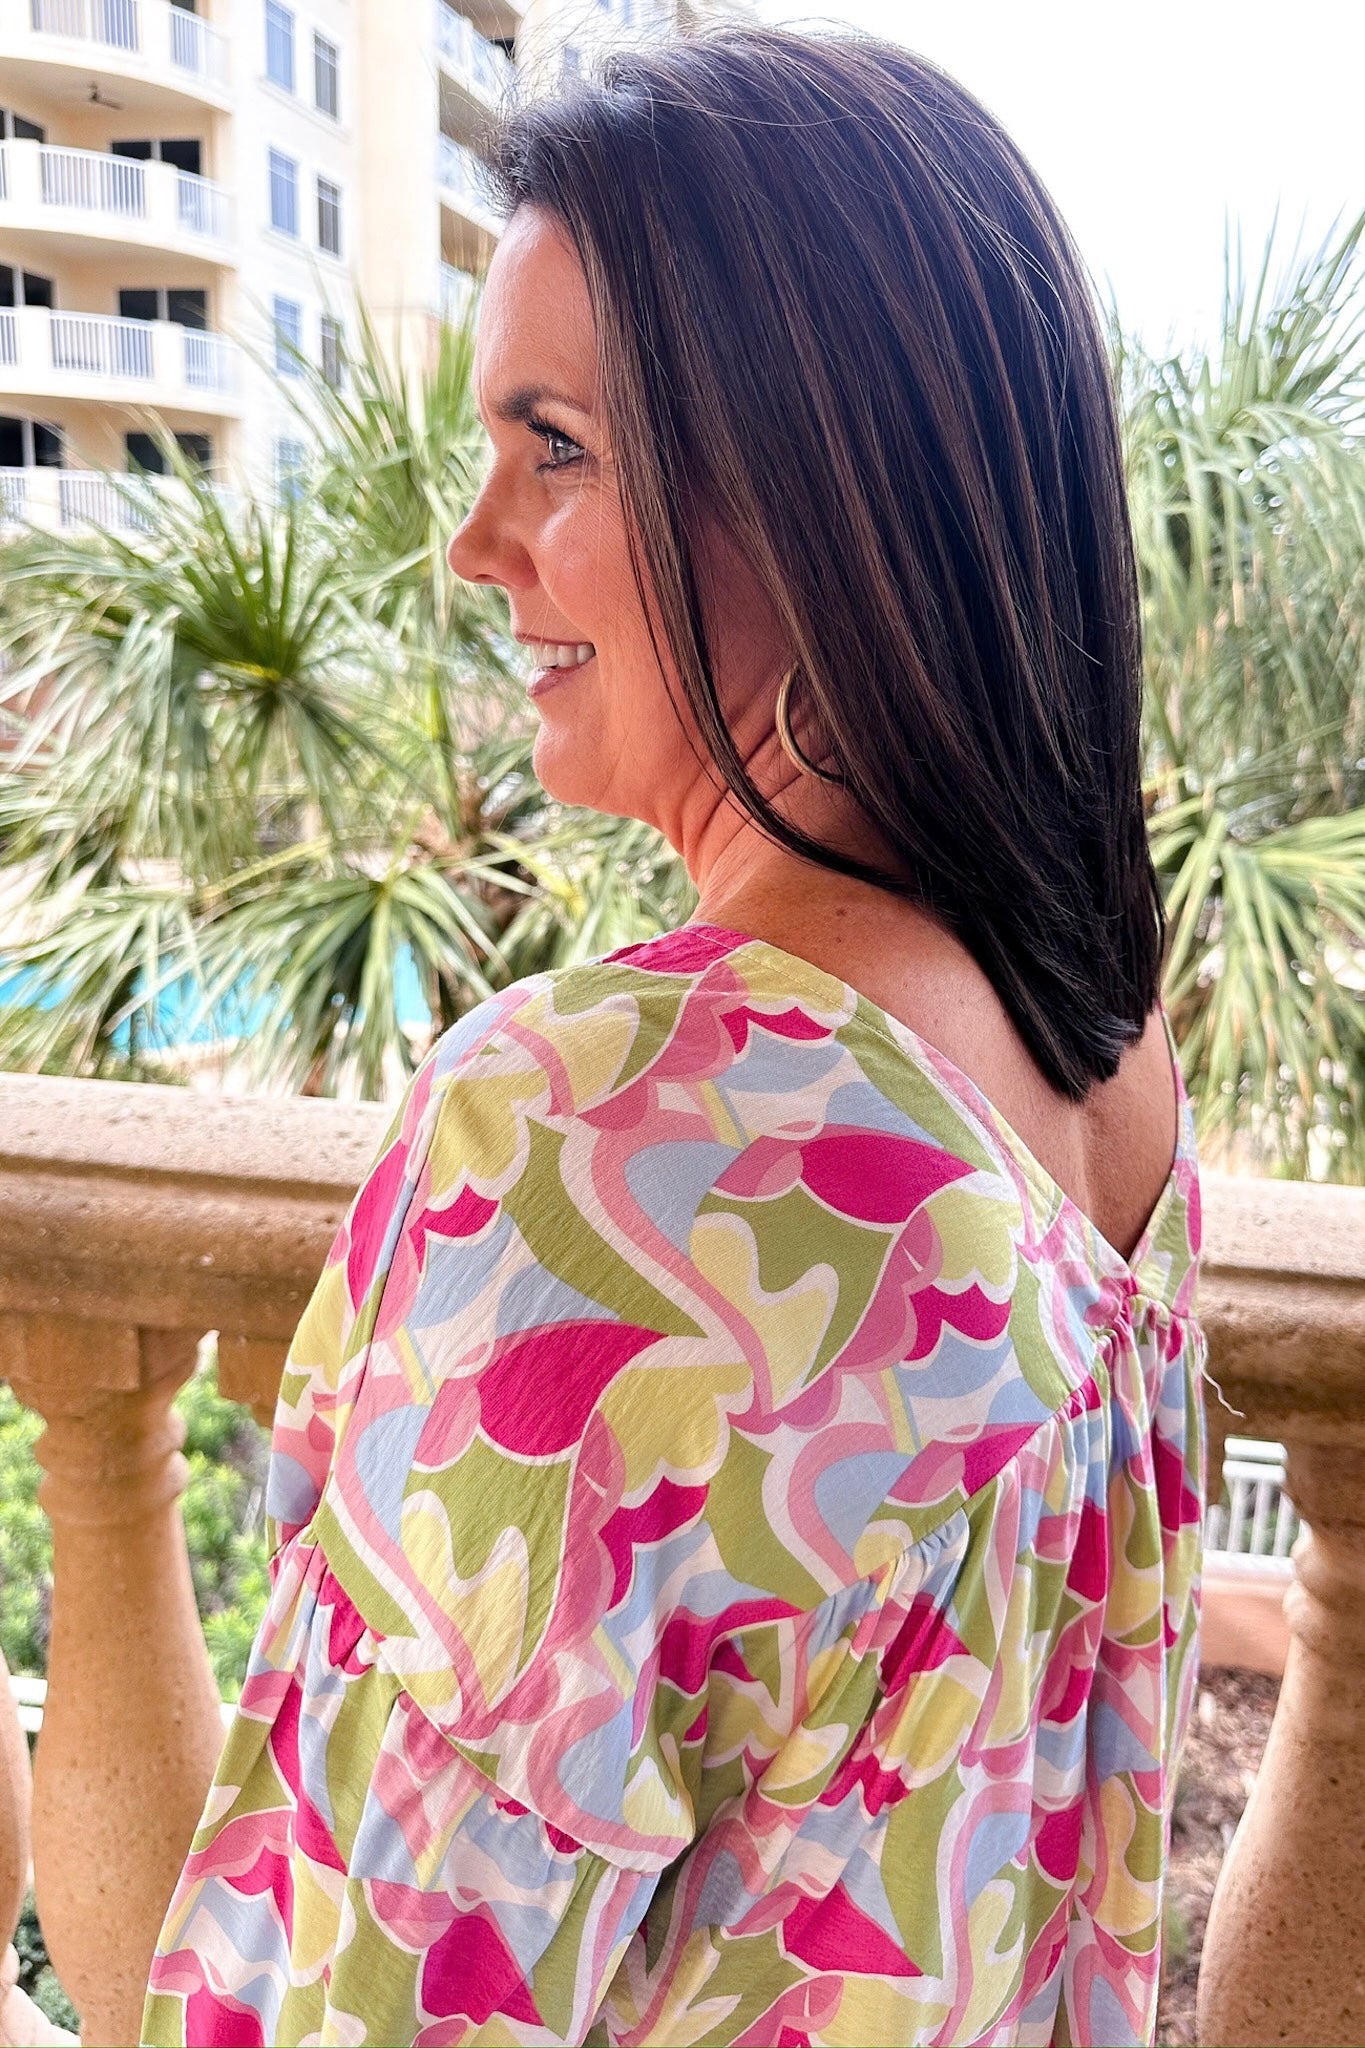 The Loren Top in Melon Come Away with Me by Michelle McDowell